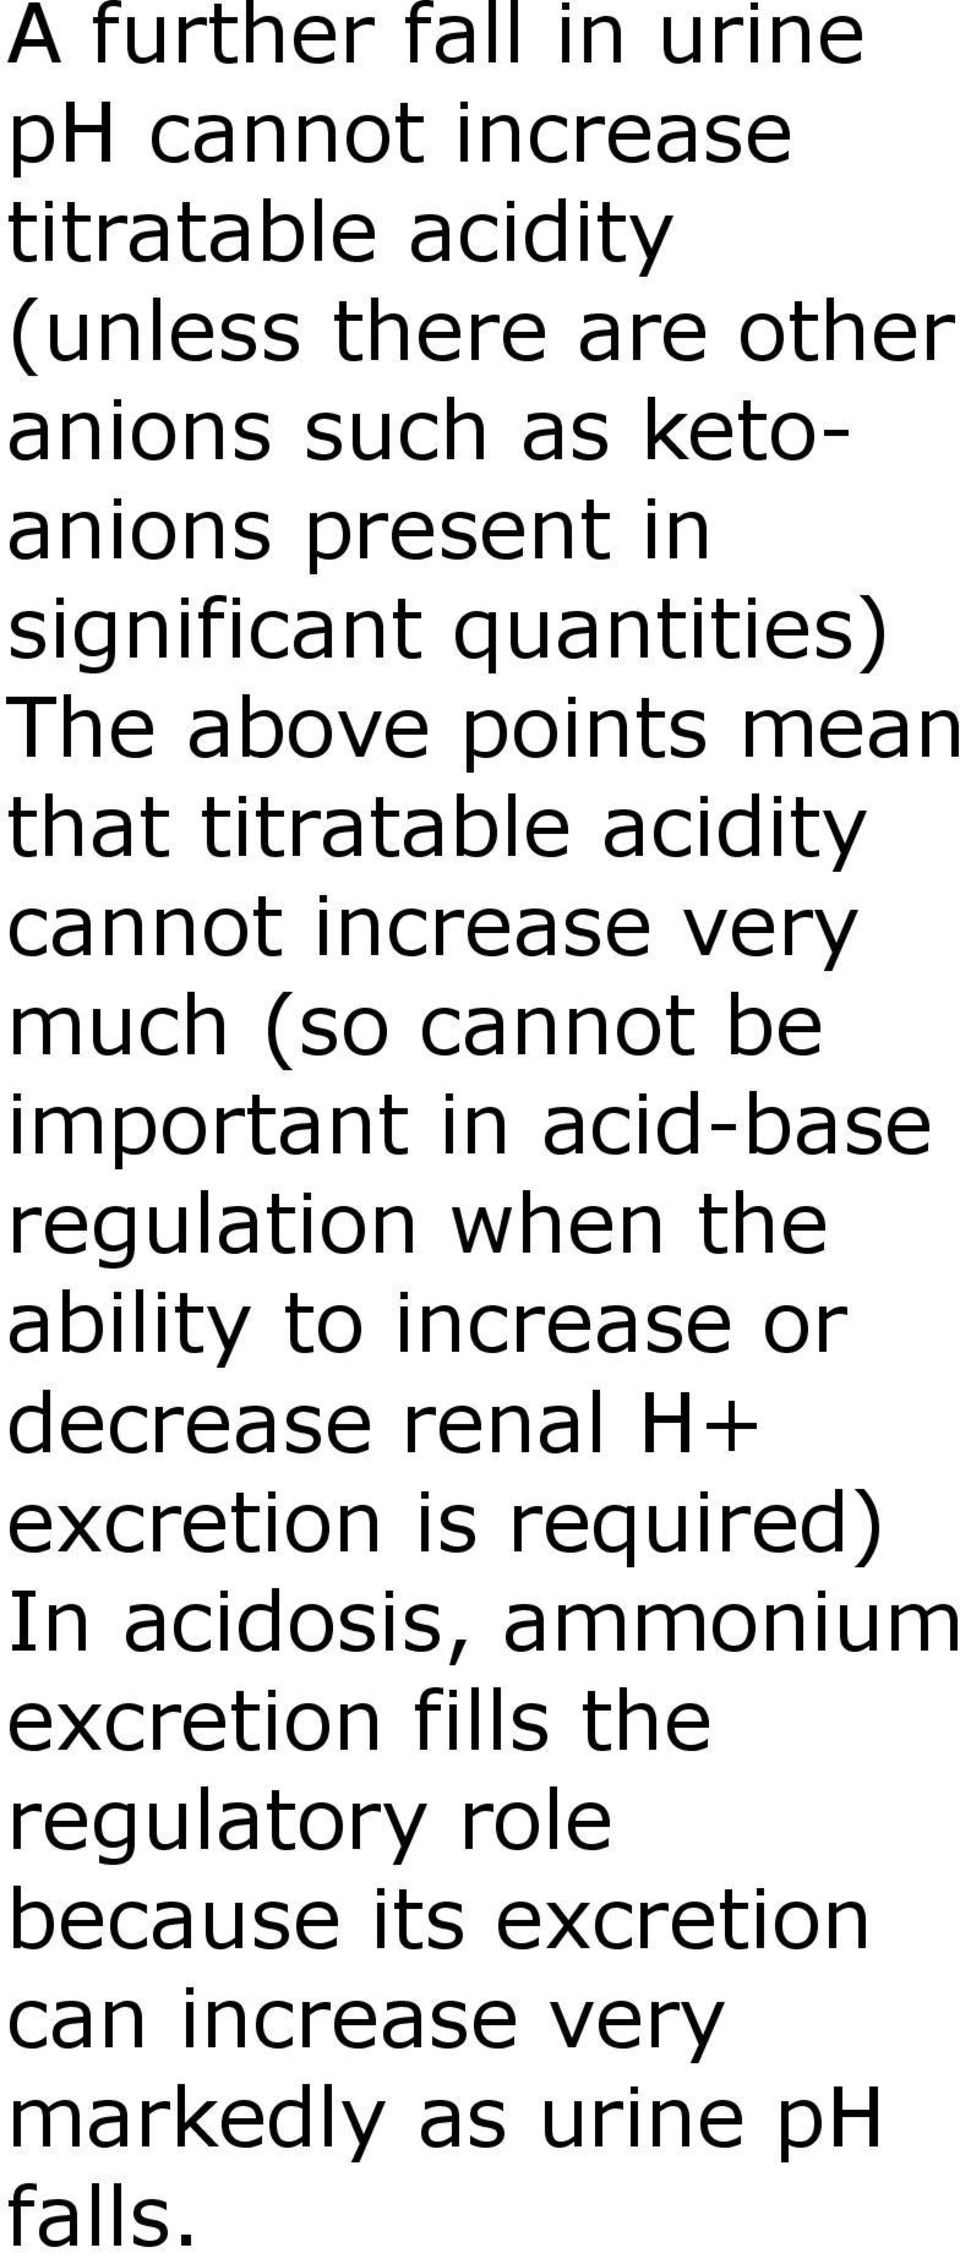 cannot be important in acid-base regulation when the ability to increase or decrease renal H+ excretion is required)